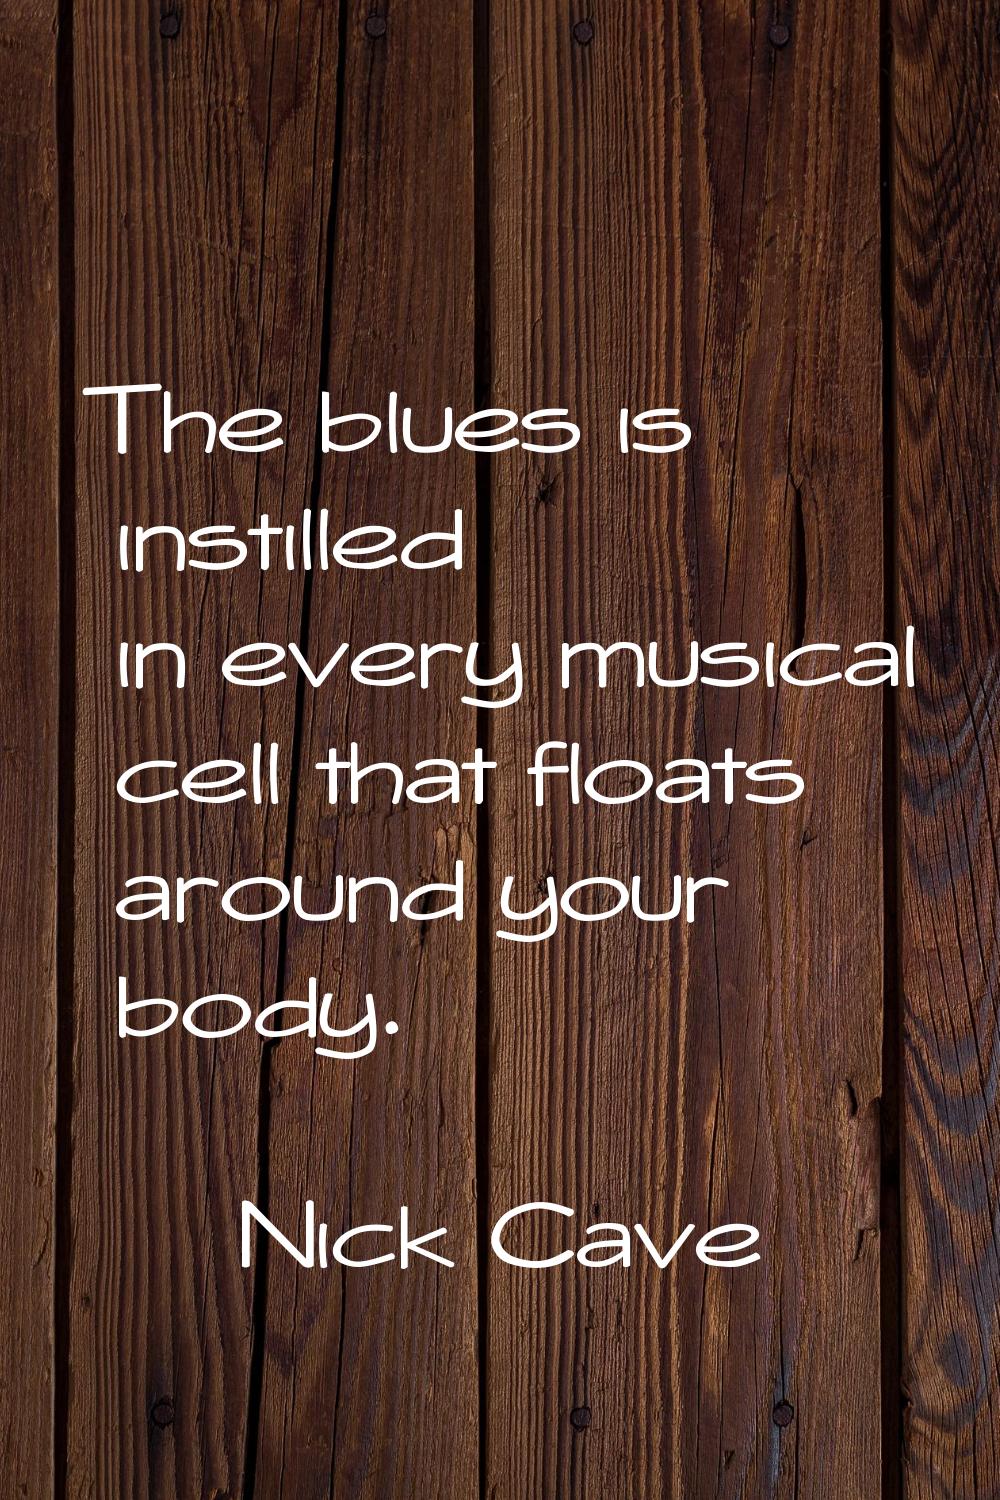 The blues is instilled in every musical cell that floats around your body.